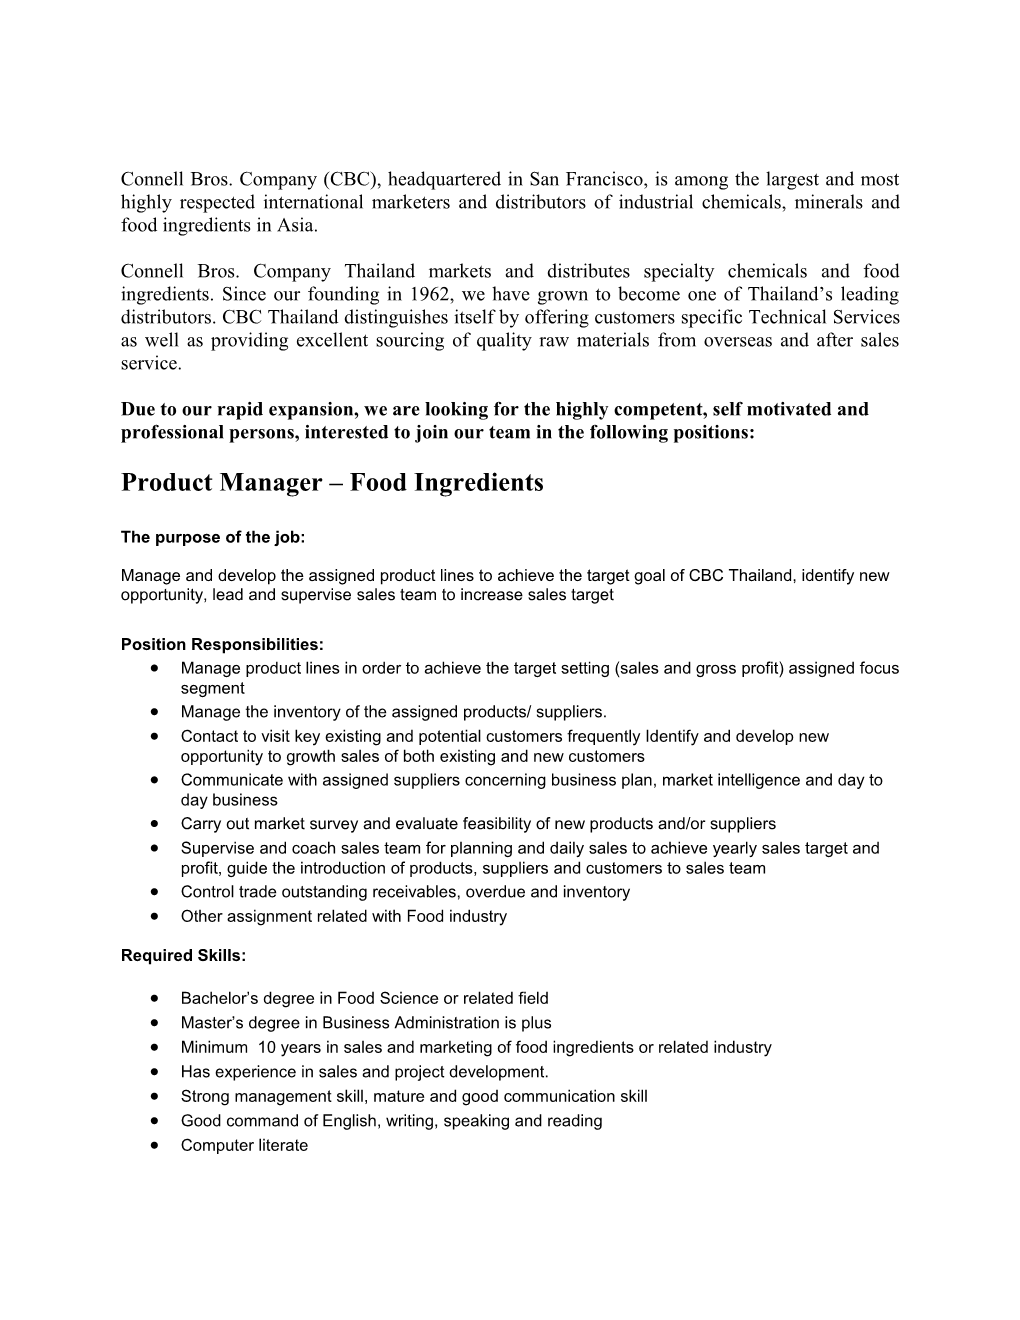 Product Manager - Food